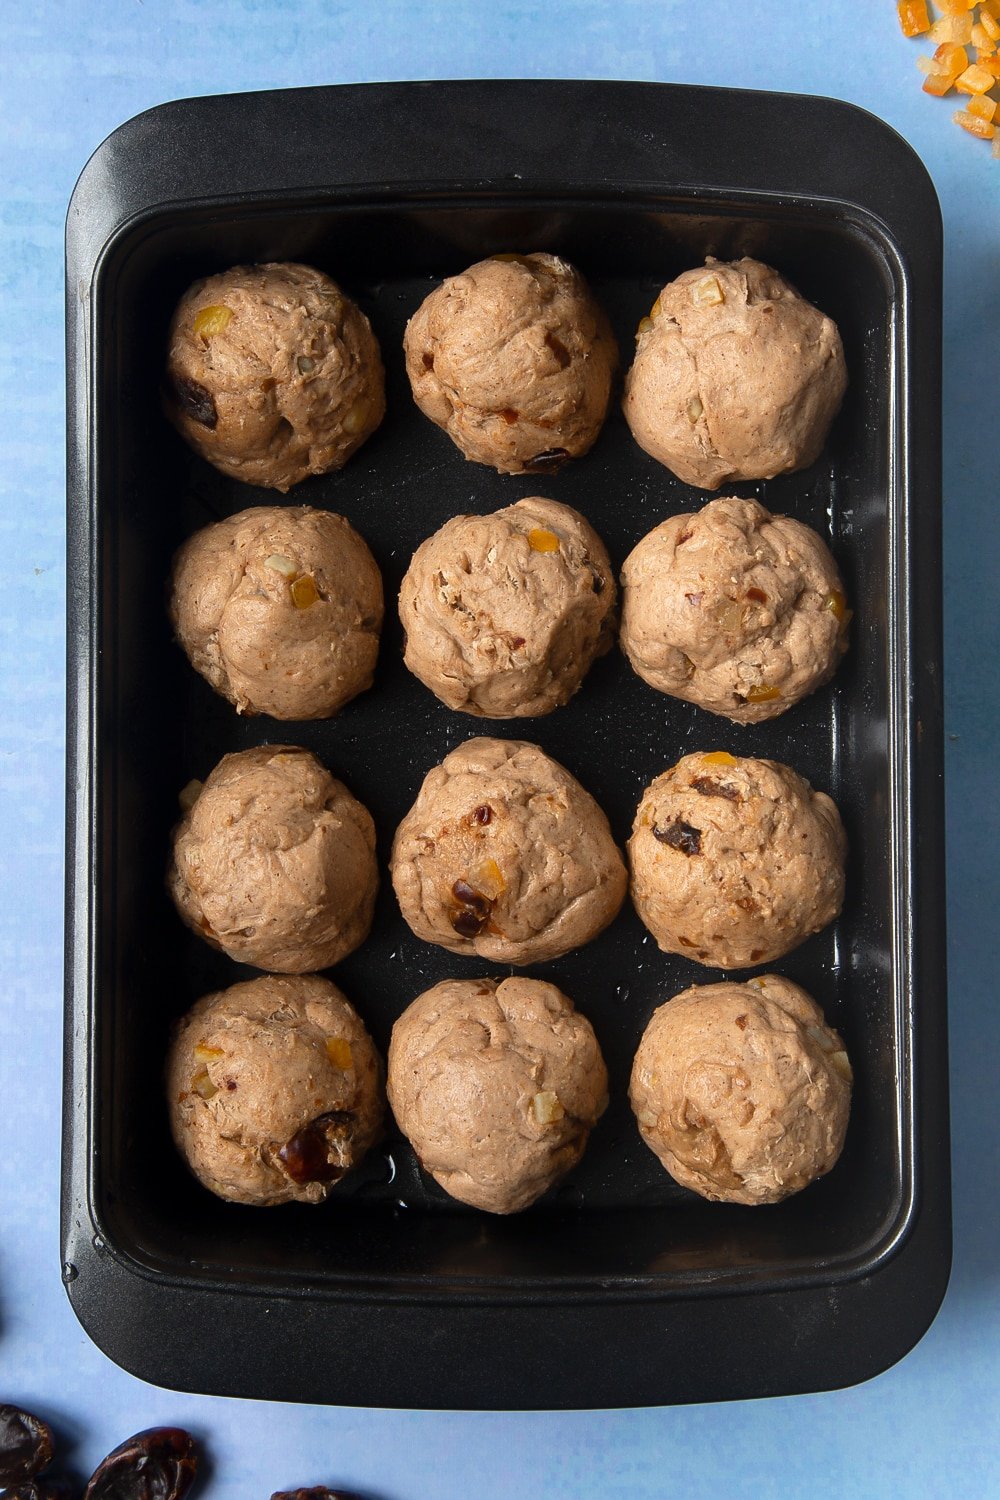 Vegan hot cross buns dough with mixed peel and chopped dates, divided into 12 balls and placed in an oiled tray.